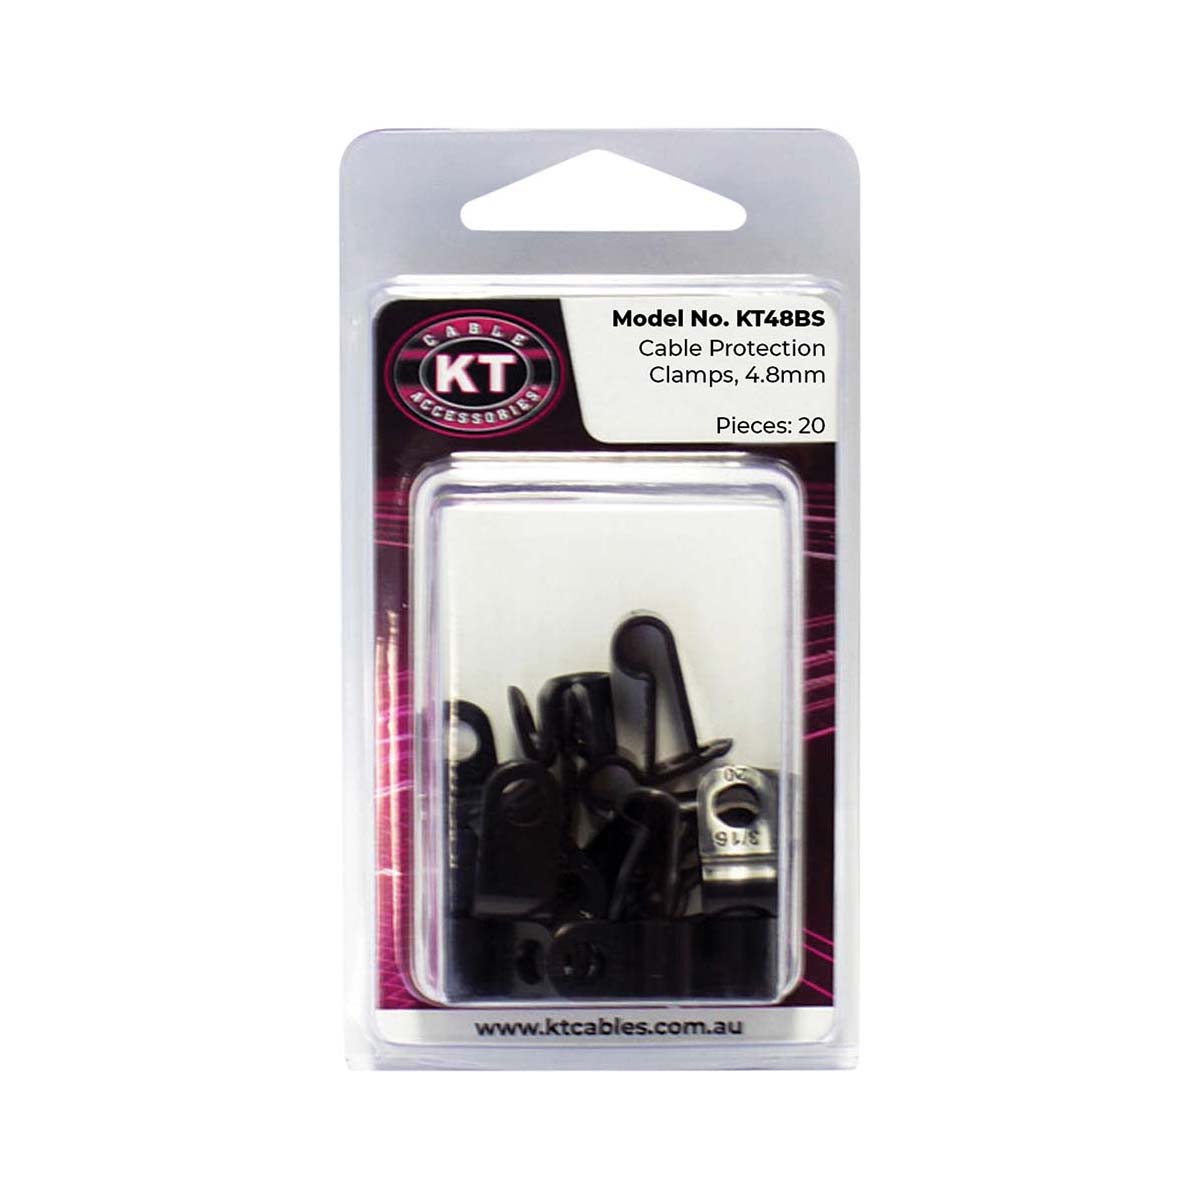 KT Cables Cable Protection Clamps 20 Pack 4.8mm